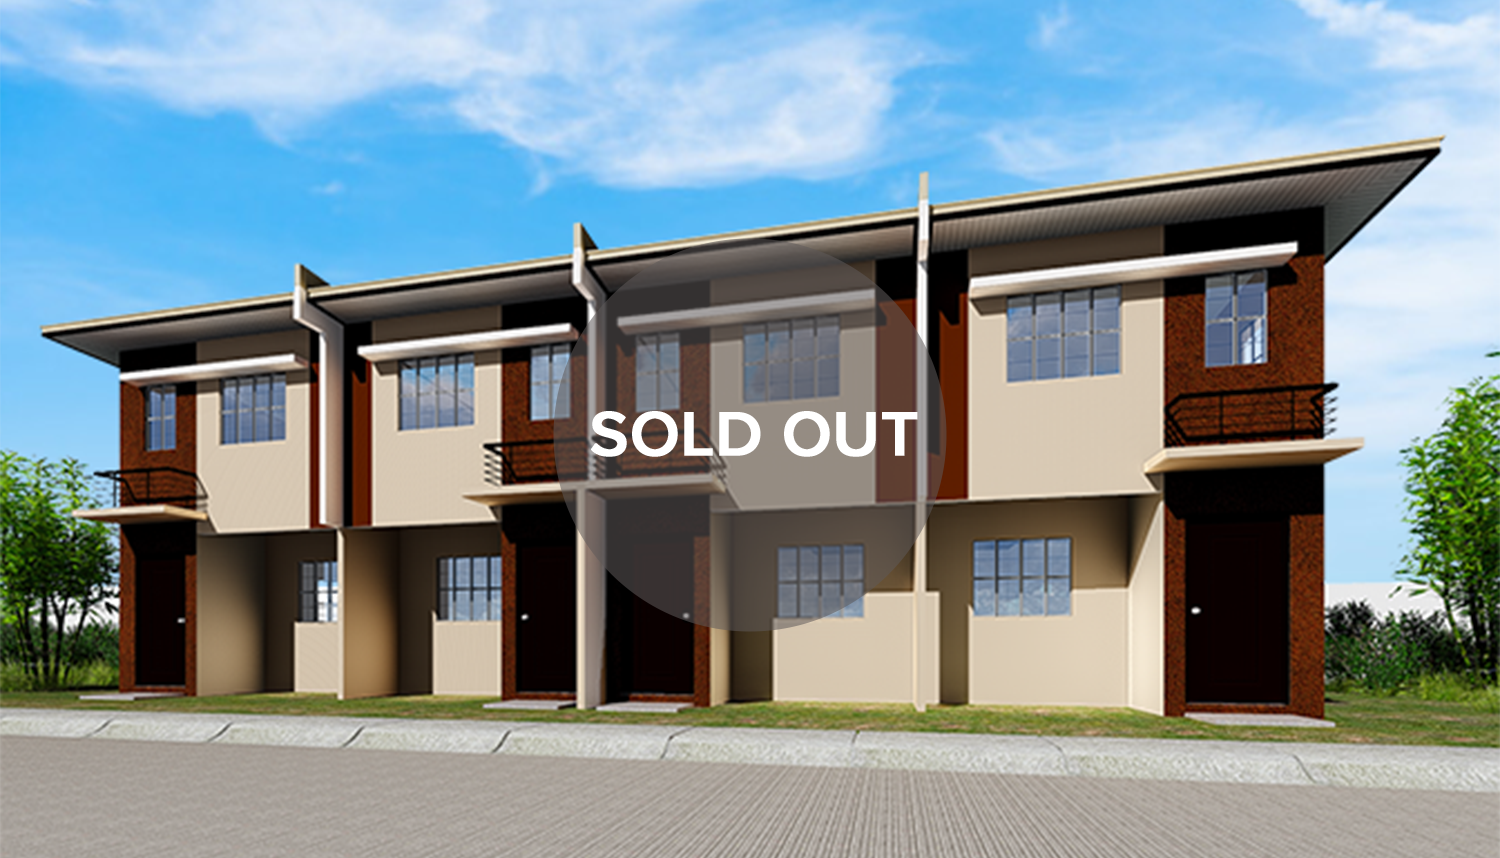 /assets/properties-house-model-gallery-and-landmarks-icons/lumina-home-models/home-model-gallery/angeli-townhouse/angeli-townhouse-image-1-sold-out.png